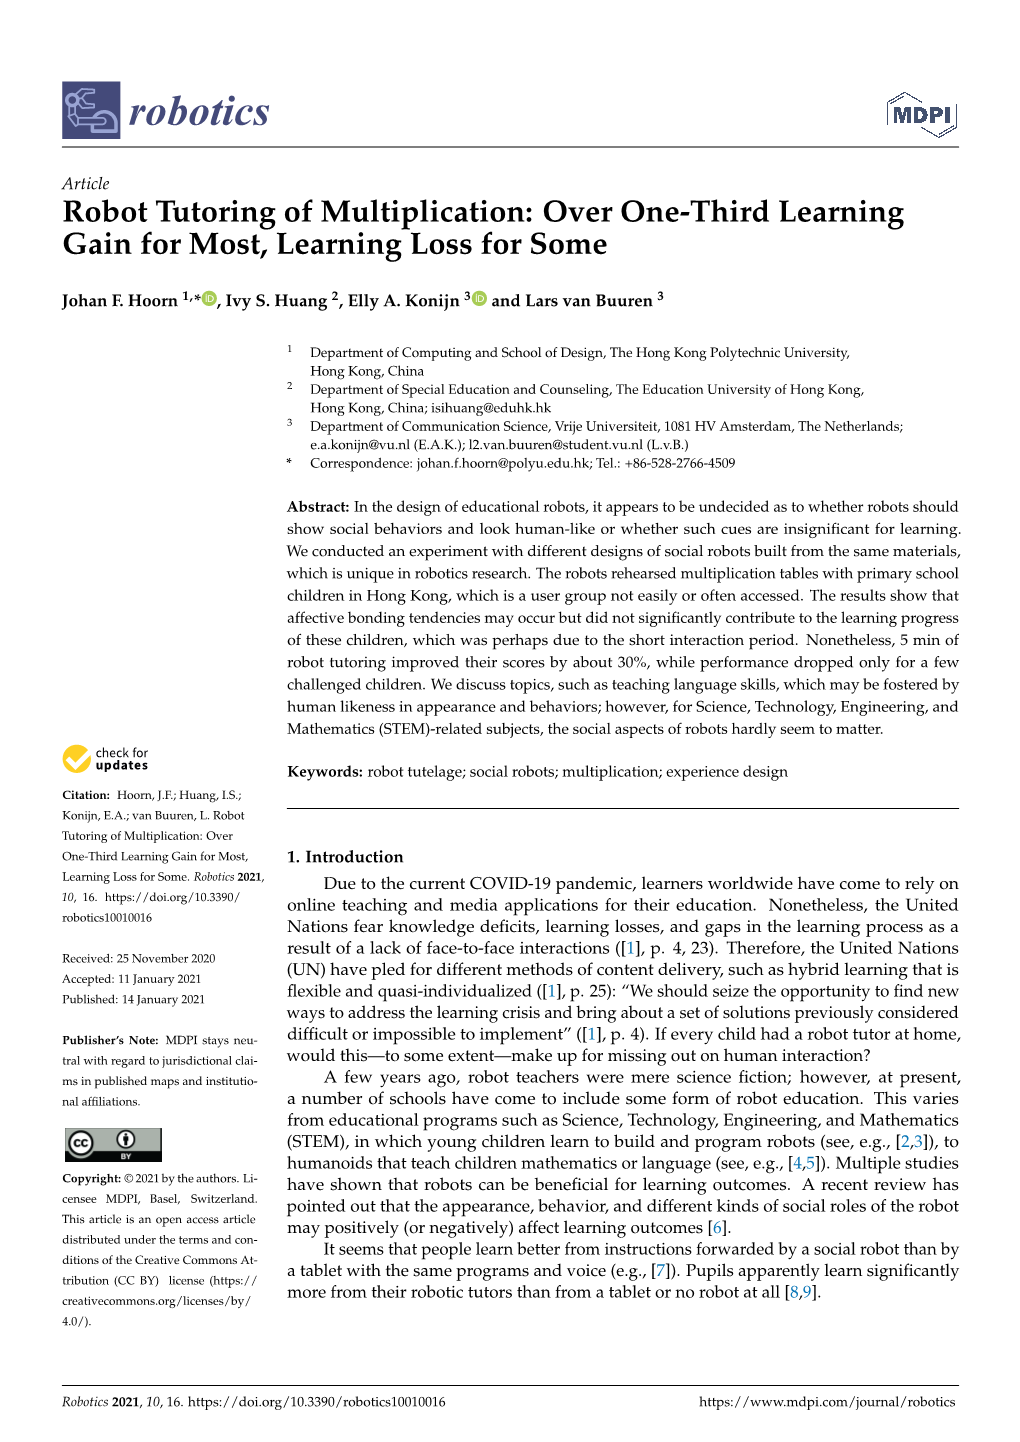 Robot Tutoring of Multiplication: Over One-Third Learning Gain for Most, Learning Loss for Some